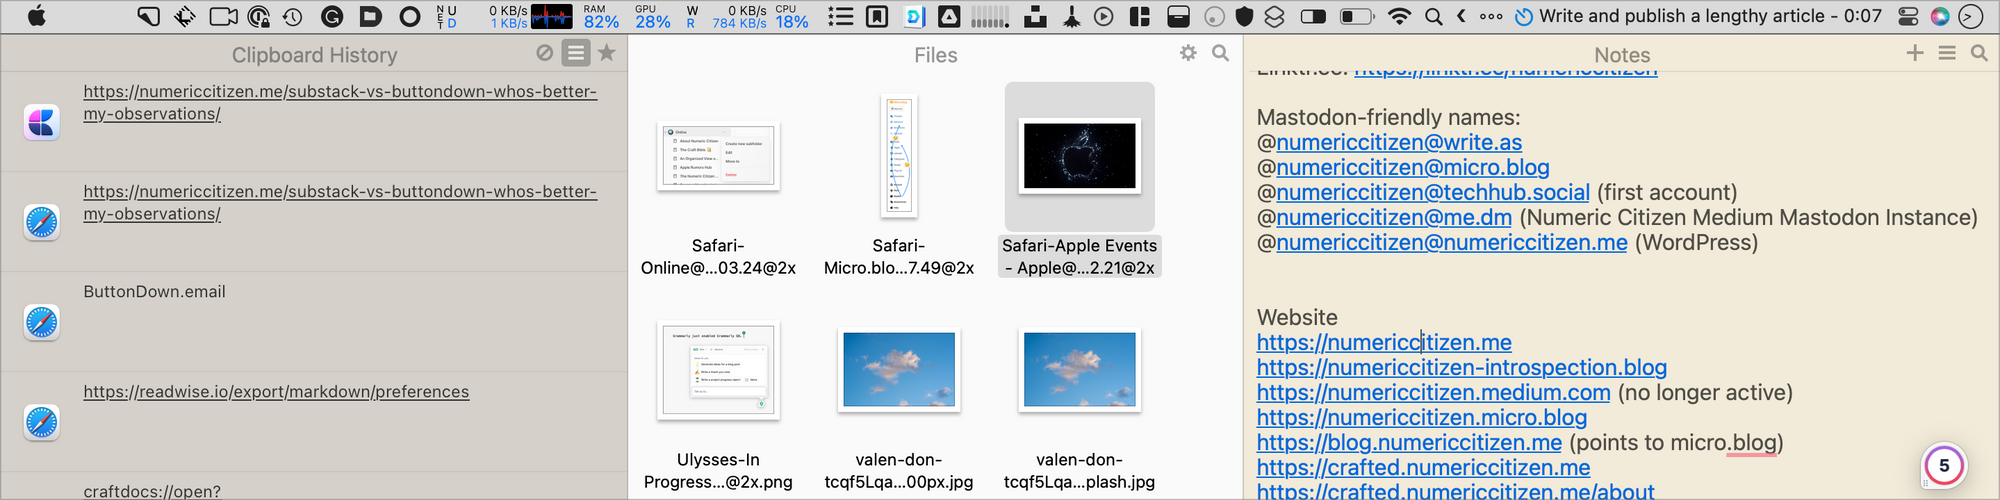 Unclutter window on my Mac — Three Areas: the clipboard history, content of a folder and content of a specific text file